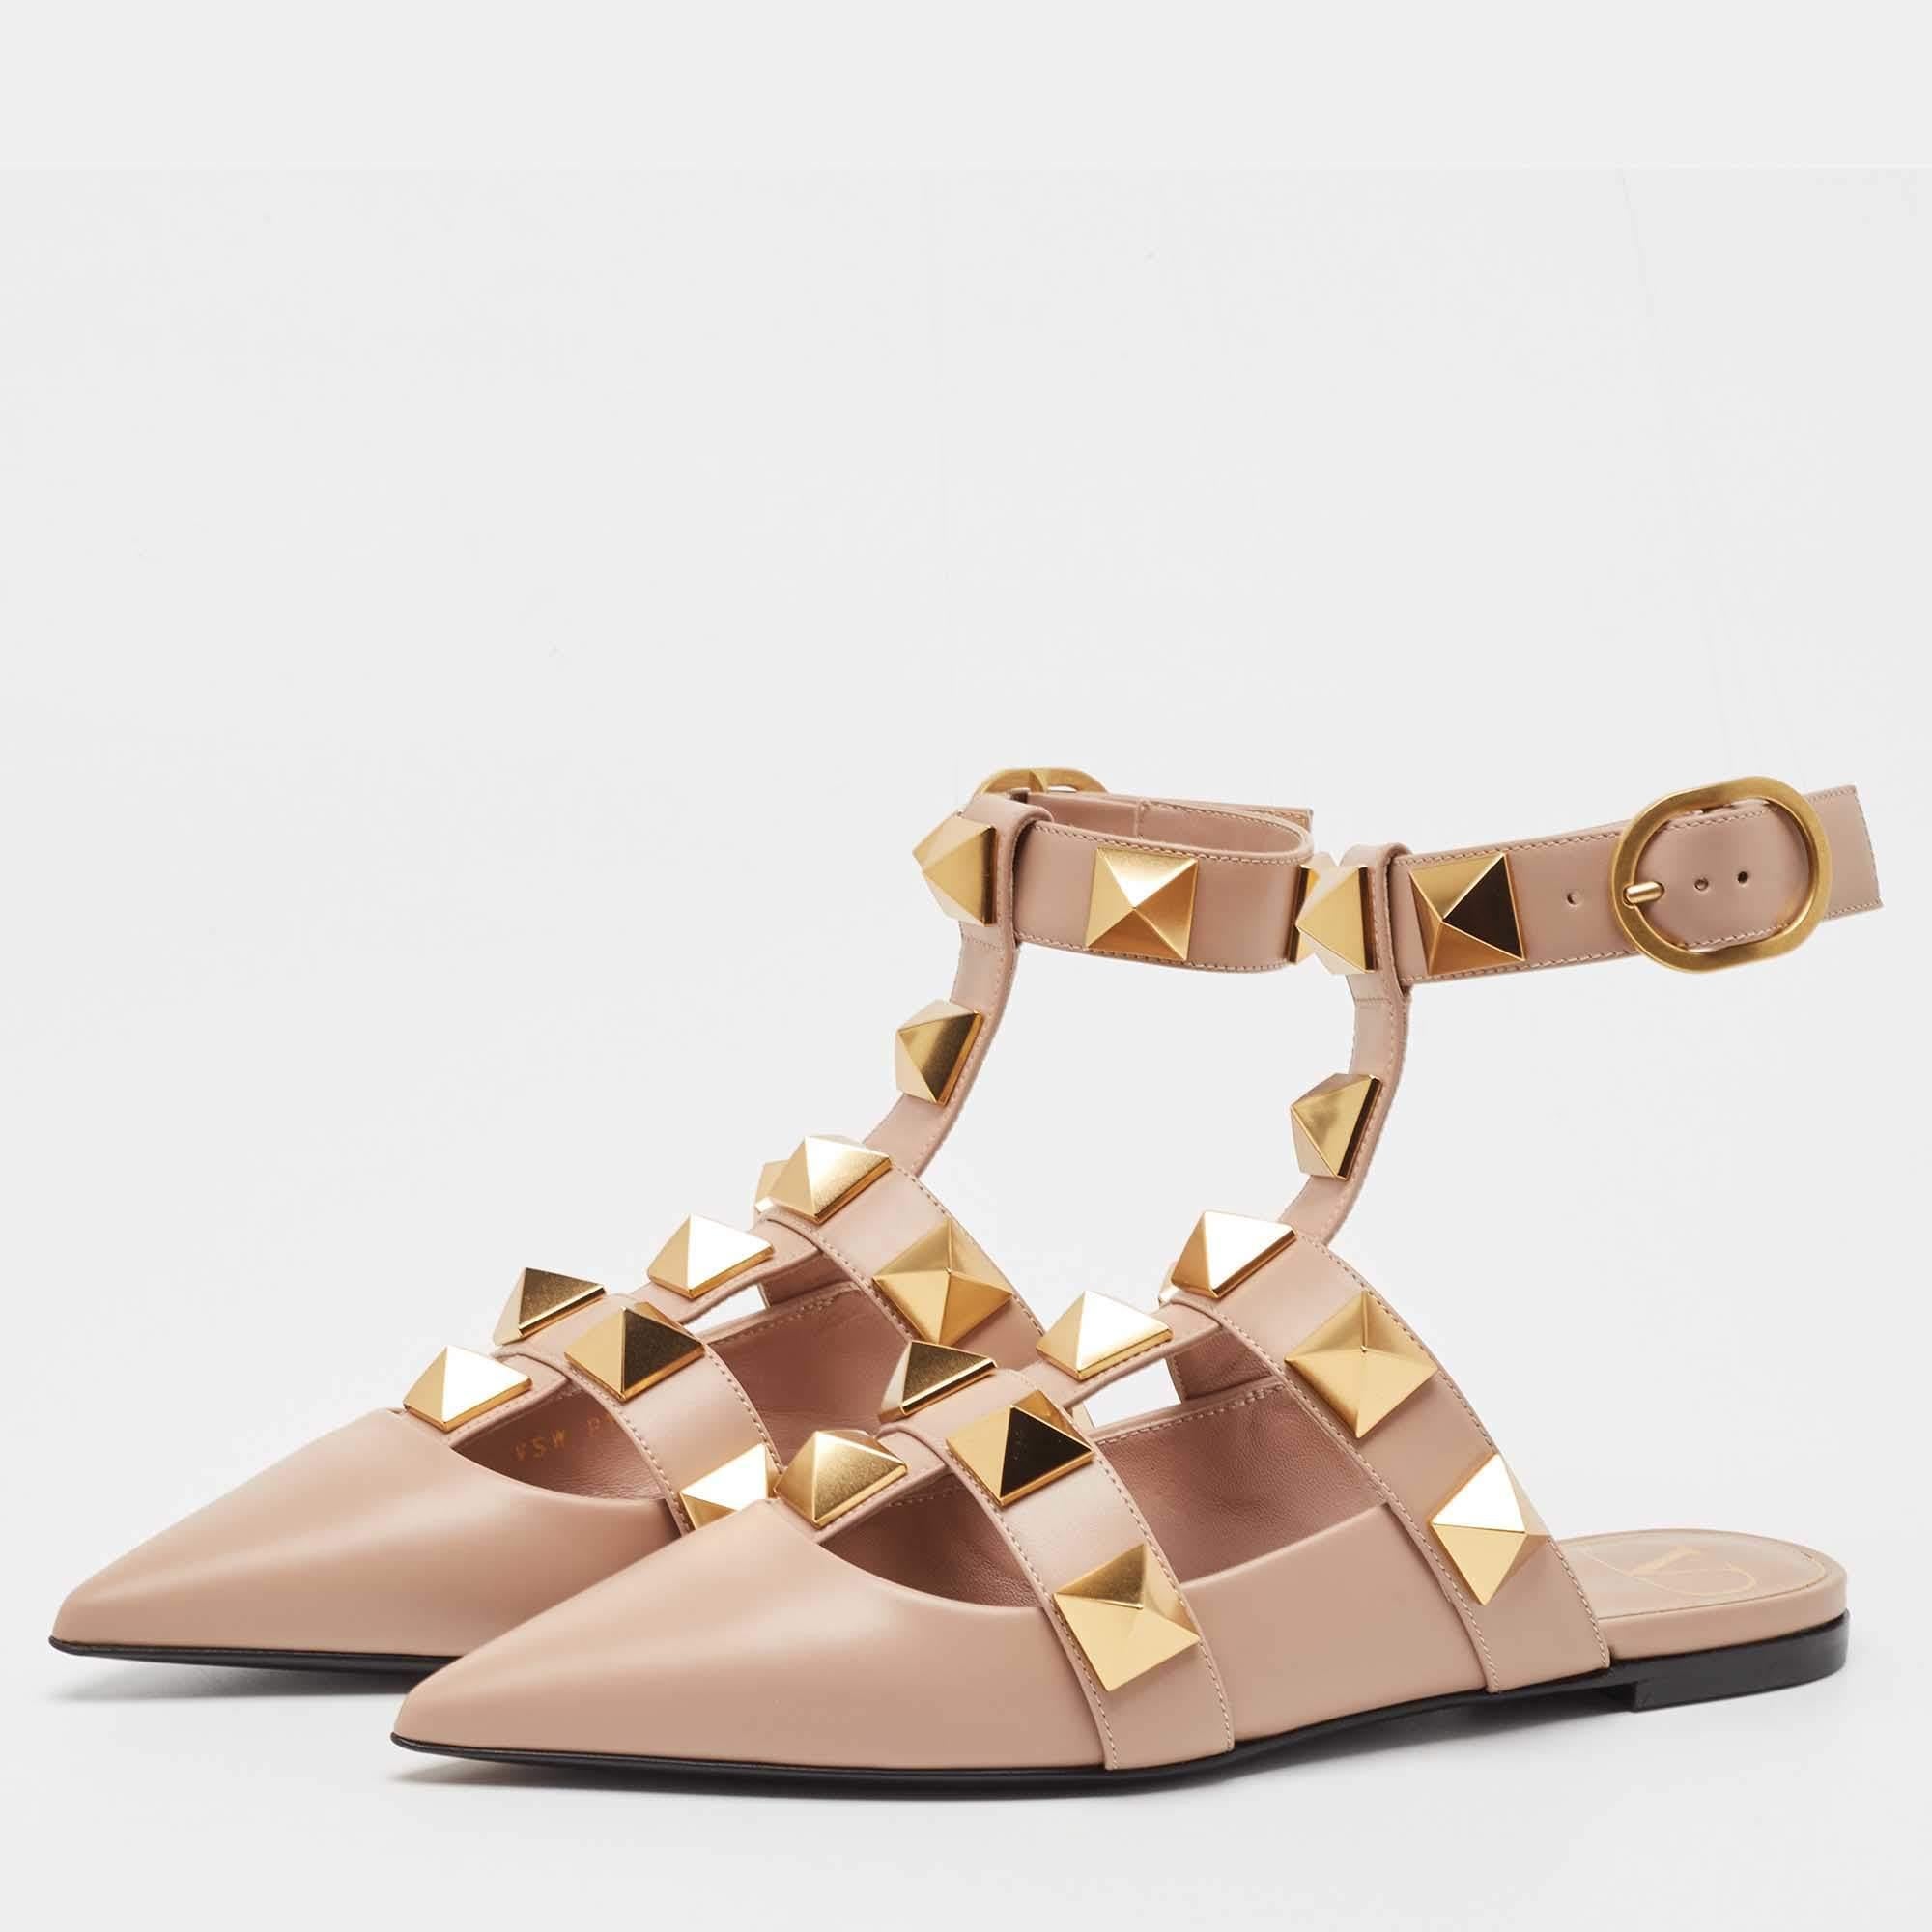 Wear these designer sandals to spruce up any outfit. They are versatile, chic, and can be easily styled. Made using quality materials, these sandals are well-built and long-lasting.


Includes
Original Dustbag, Original Box, Info Booklet